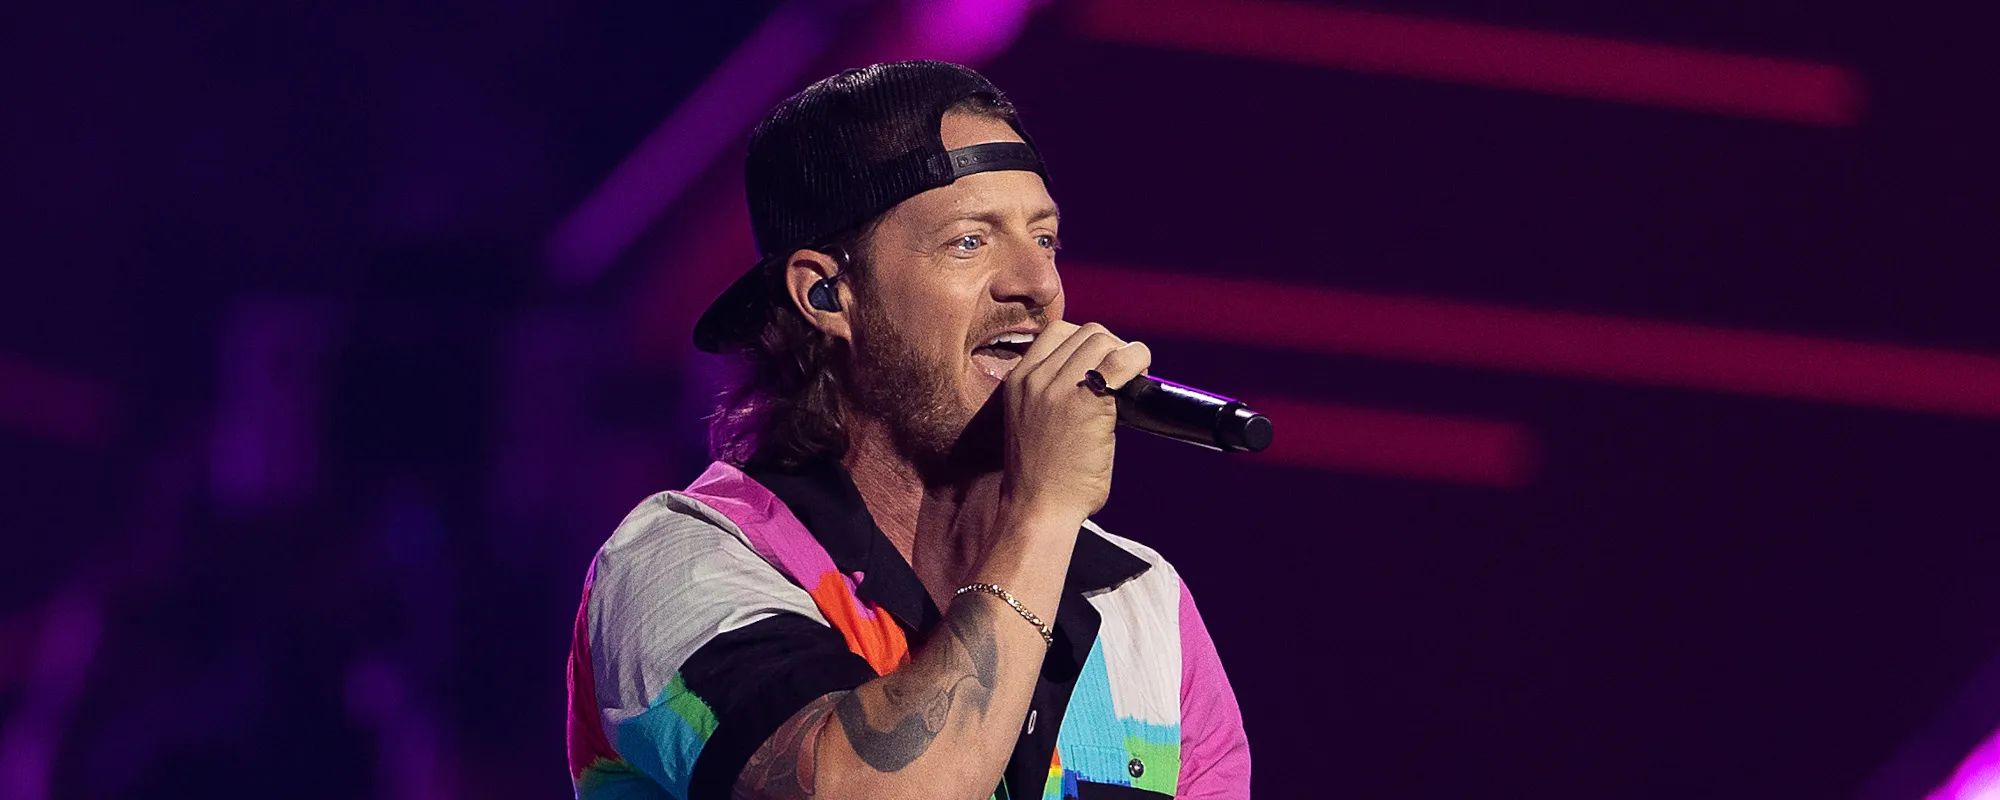 Florida Georgia Line’s Tyler Hubbard Releases “5 Foot 9” to Launch Solo Career